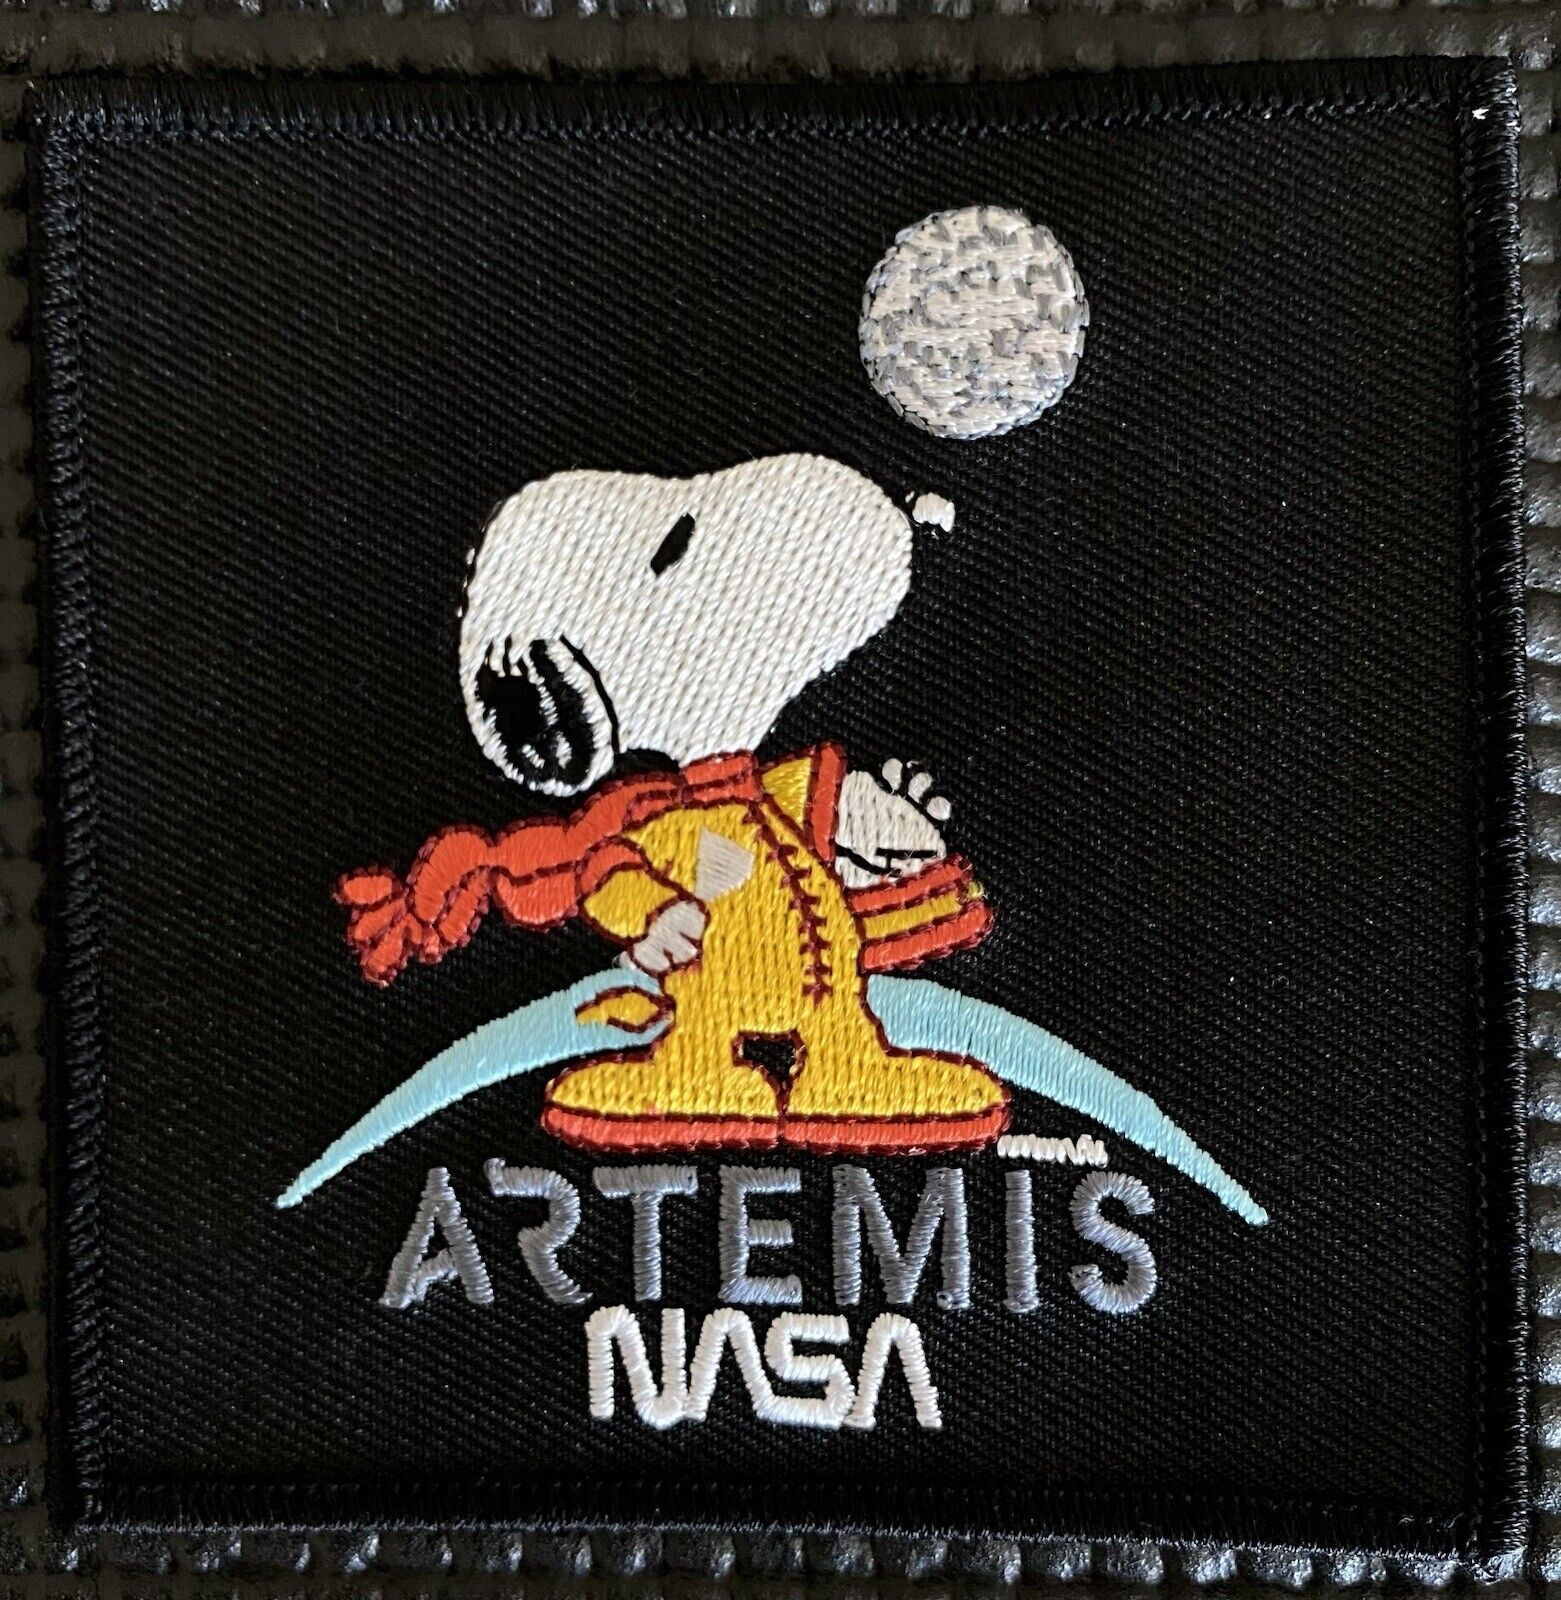 NASA - ARTEMIS ASTRONAUT MOON MISSION OFFICIAL SPACE PATCH- 3.5”